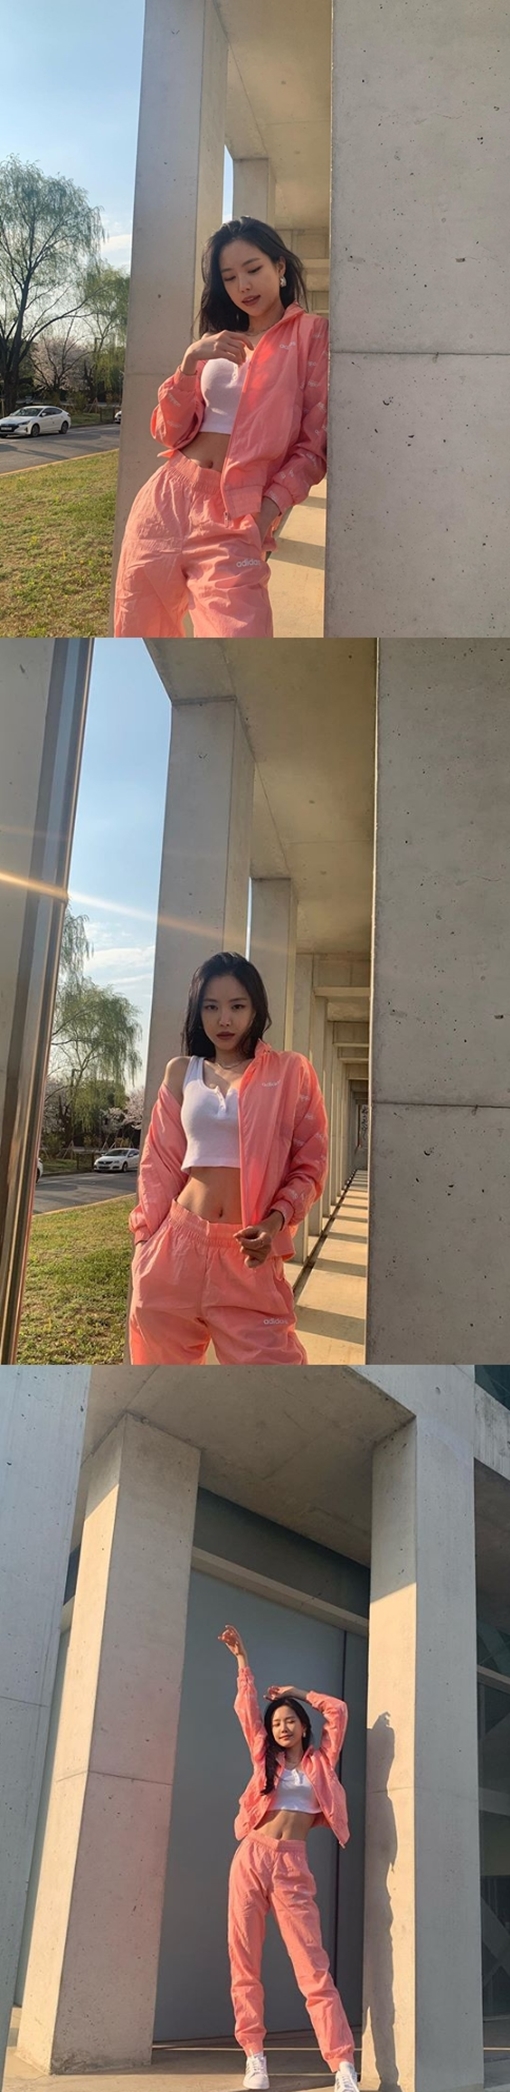 Singer and Actor Son Na-eun flaunted her beautiful beautiful beautiful looksSon Na-eun posted several photos on his Instagram account on Wednesday.The photo shows Son Na-eun wearing a white crop top and pink Exercise suit.Son Na-eun, who also has long straight hair and clear features, caught the attention of fans with pure beautiful looks.On the other hand, Son Na-eun will appear on MBC Drama Would you like to have dinner with me scheduled to air in May.